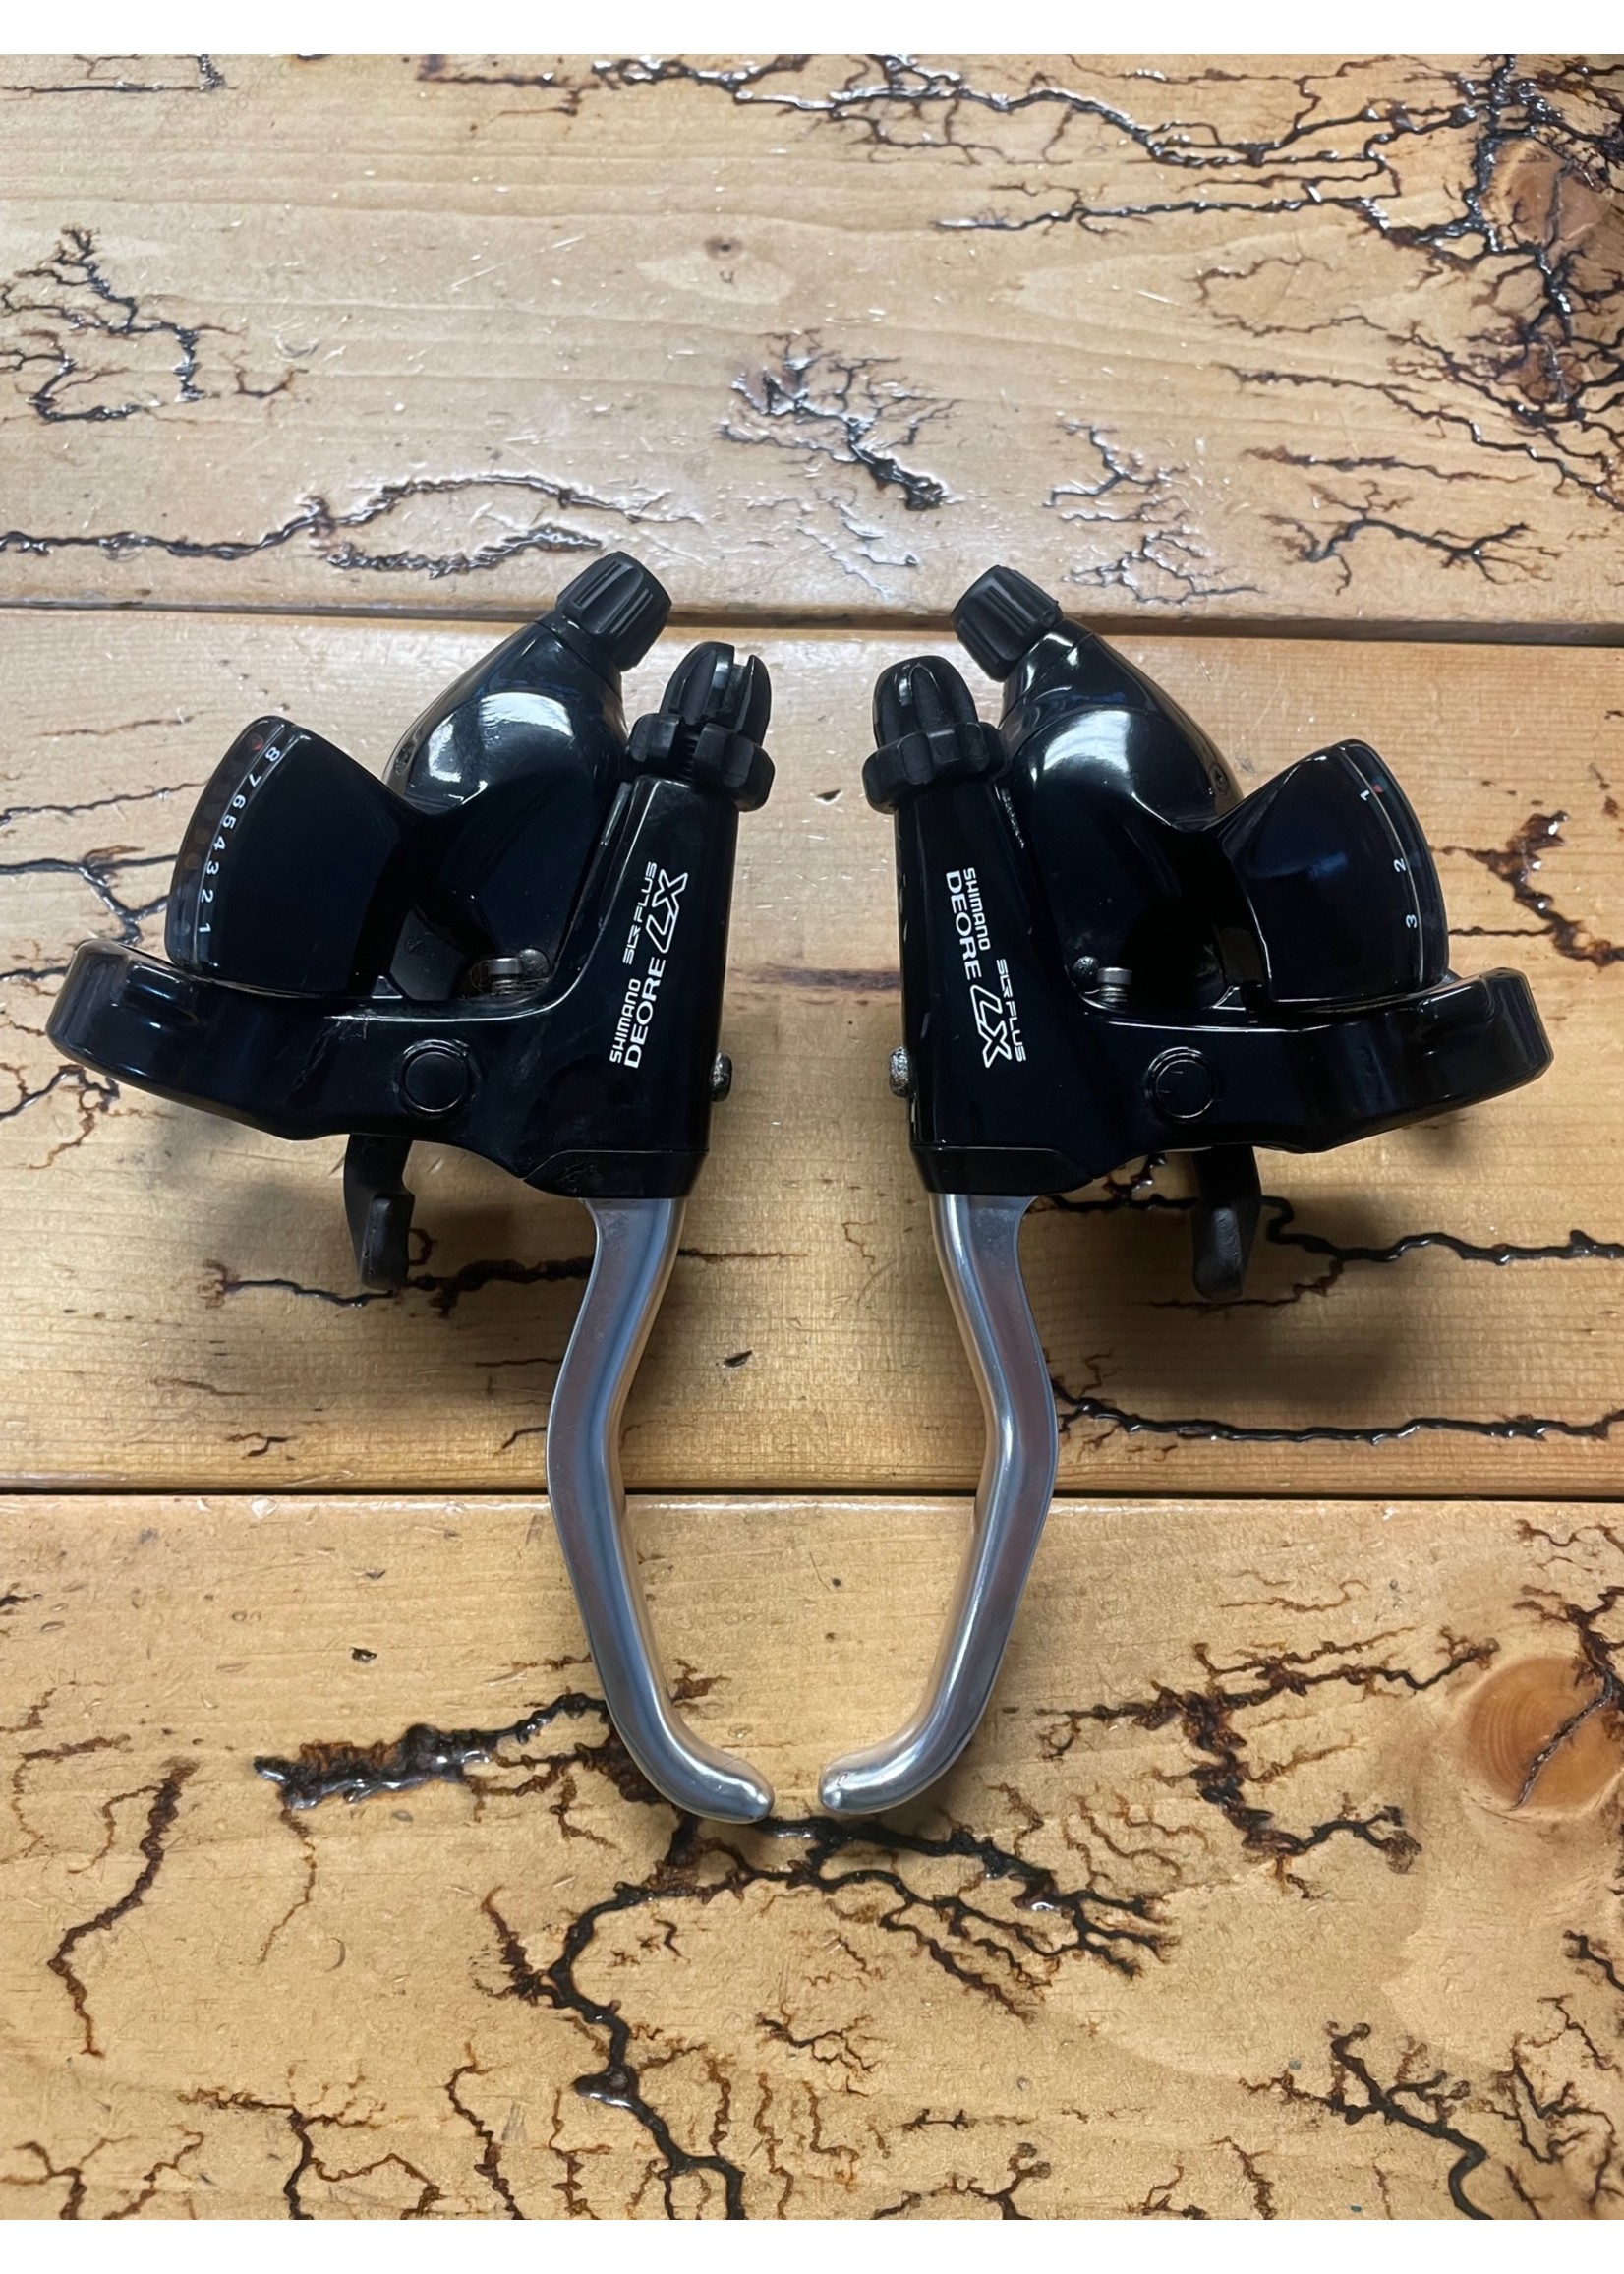 SHIMANO Shimano Deore LX ST-M566 3x8 Shifters and Brake Levers